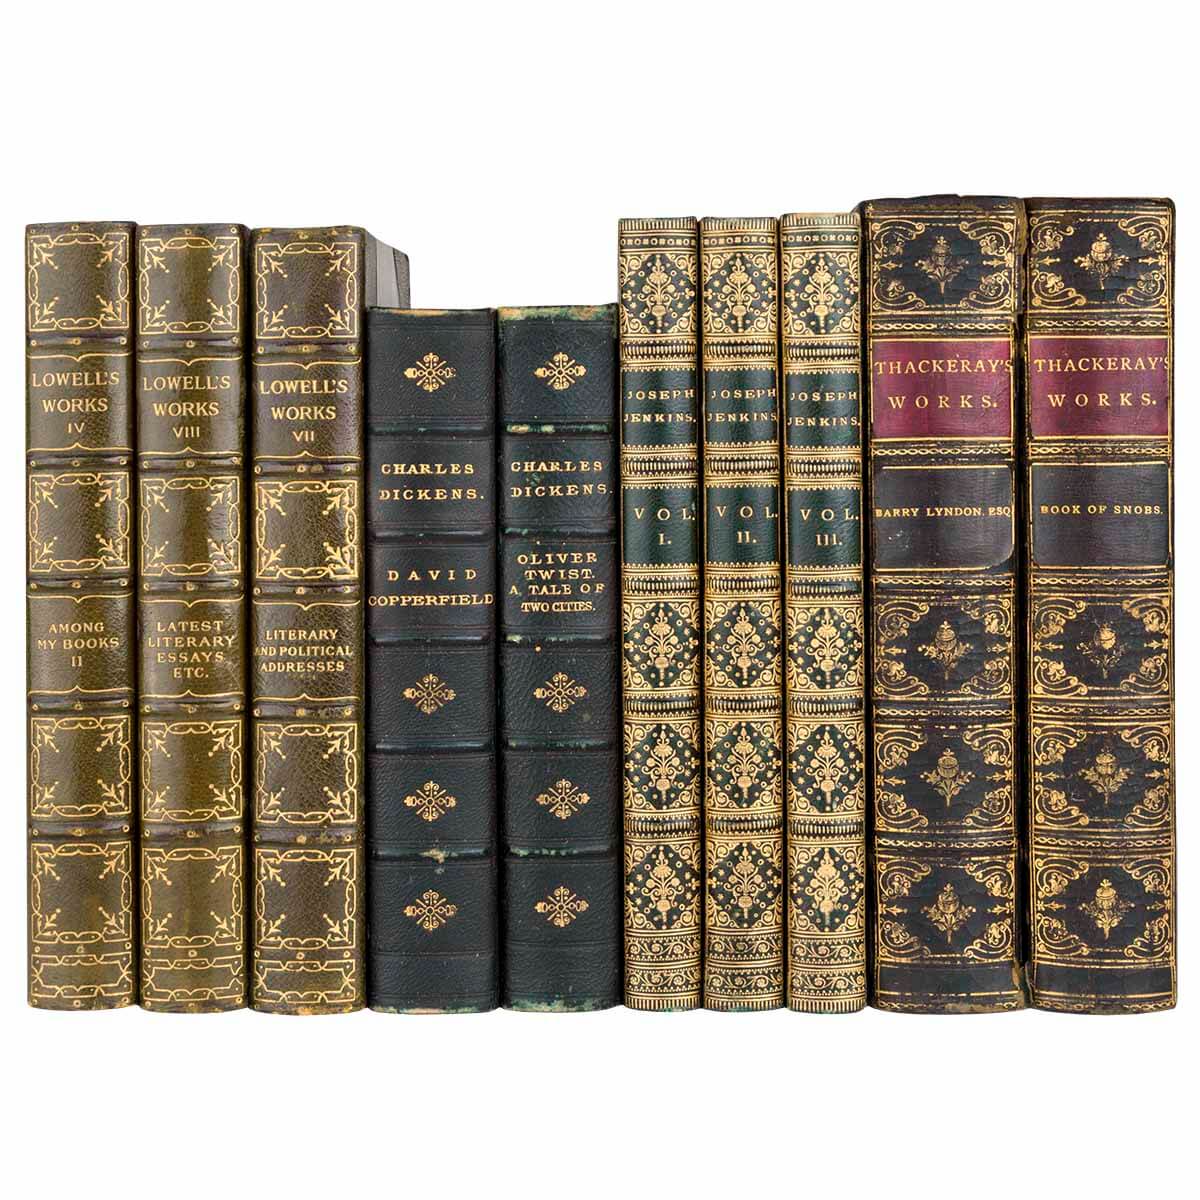   Our carefully curated linear foot collections of high-quality books offer a diverse range of literature, history, philosophy, and the arts, meticulously selected to enrich any interior. With publication dates spanning from 1800 to 1920, each book in our collection is a stunning testament to a bygone era, showcasing unparalleled craftsmanship and an abundance of character.